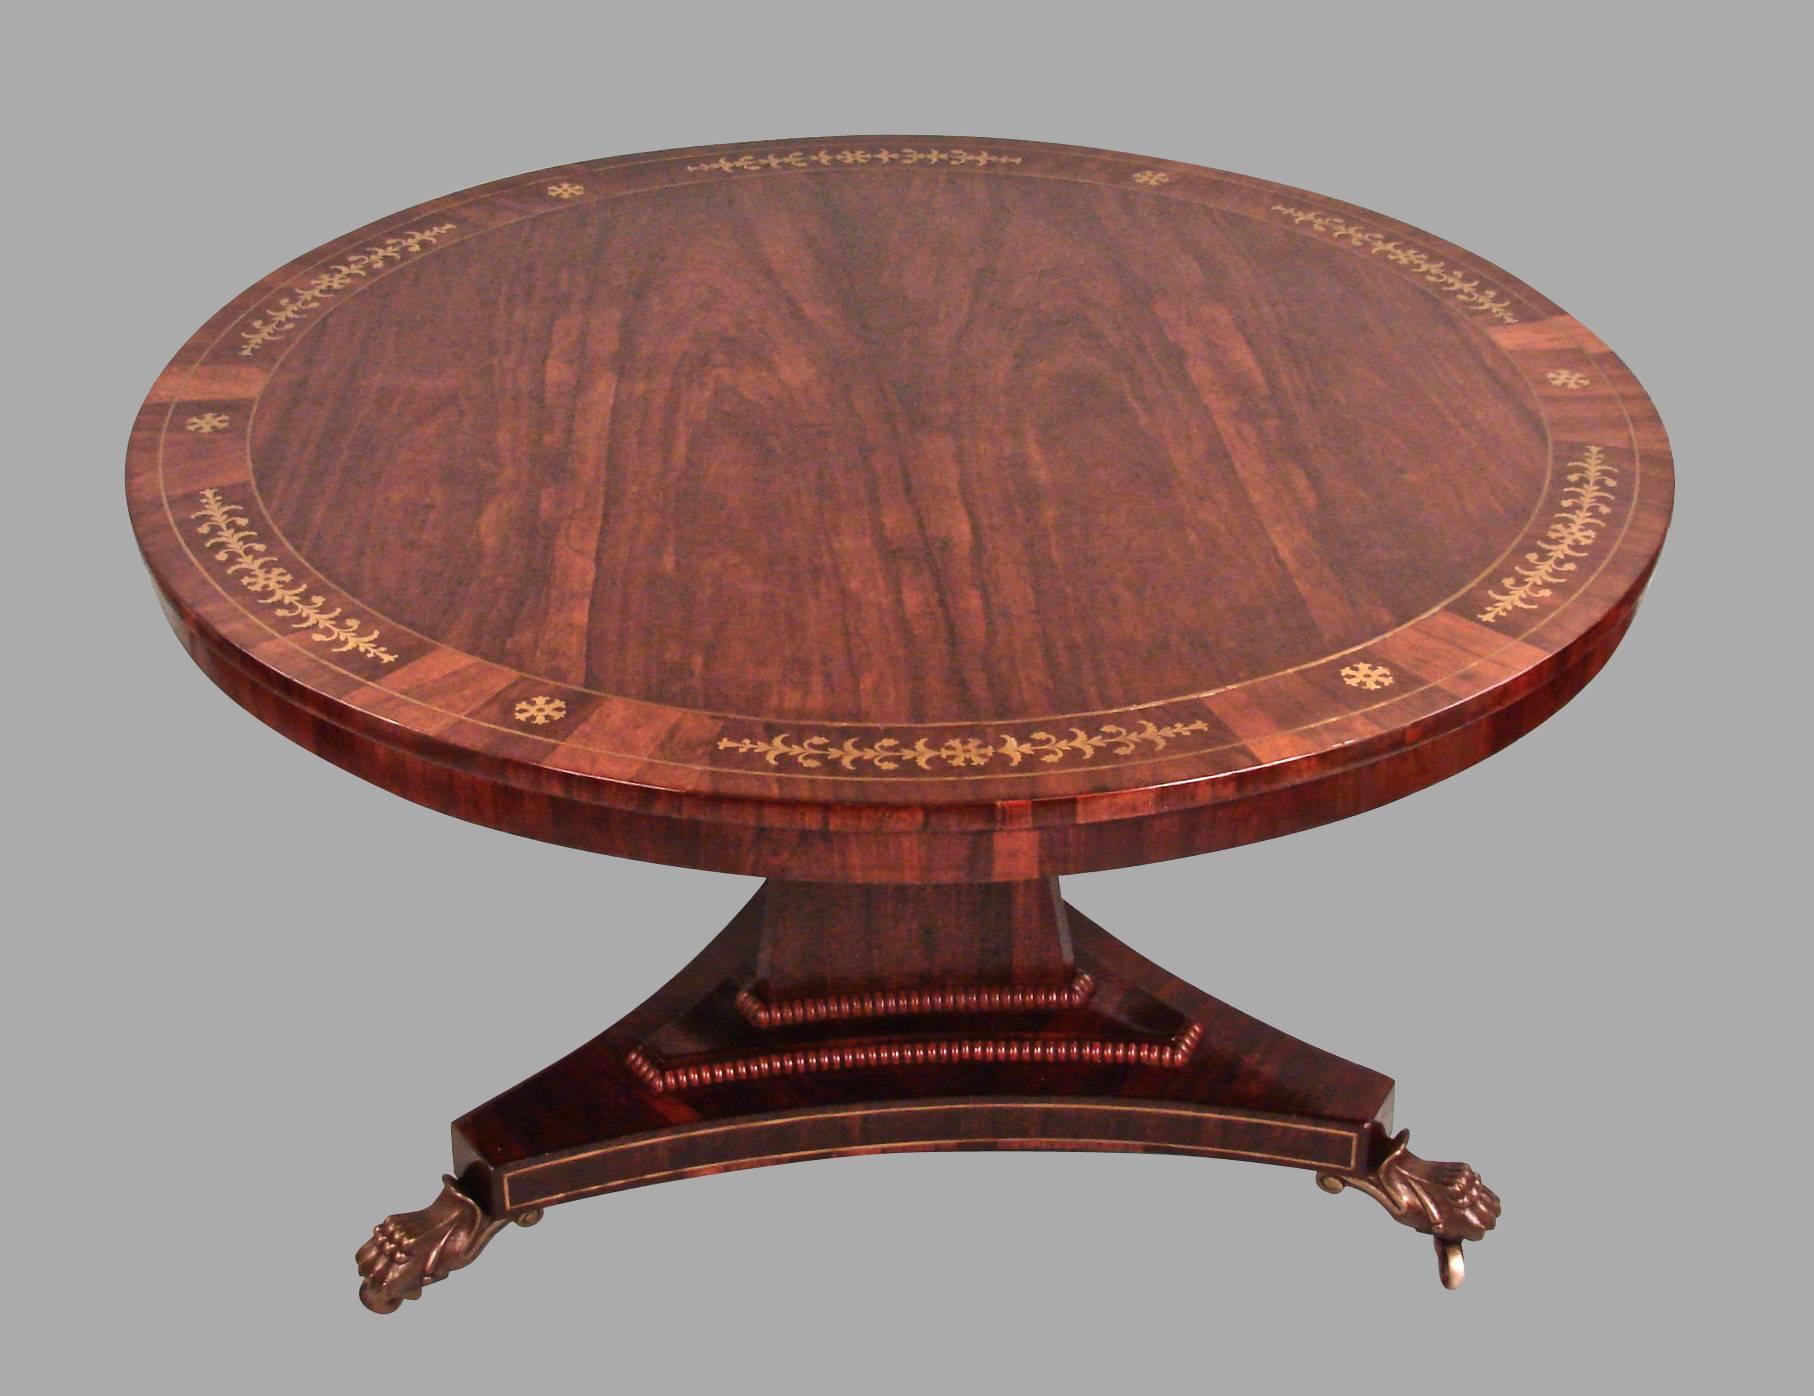 A fine quality Regency rosewood center table, the top with a lovely inlaid brass floral design, the base with a stepped beaded platform further inlaid with brass, all supported on cast bronze animal paw feet ending in casters, circa 1815.